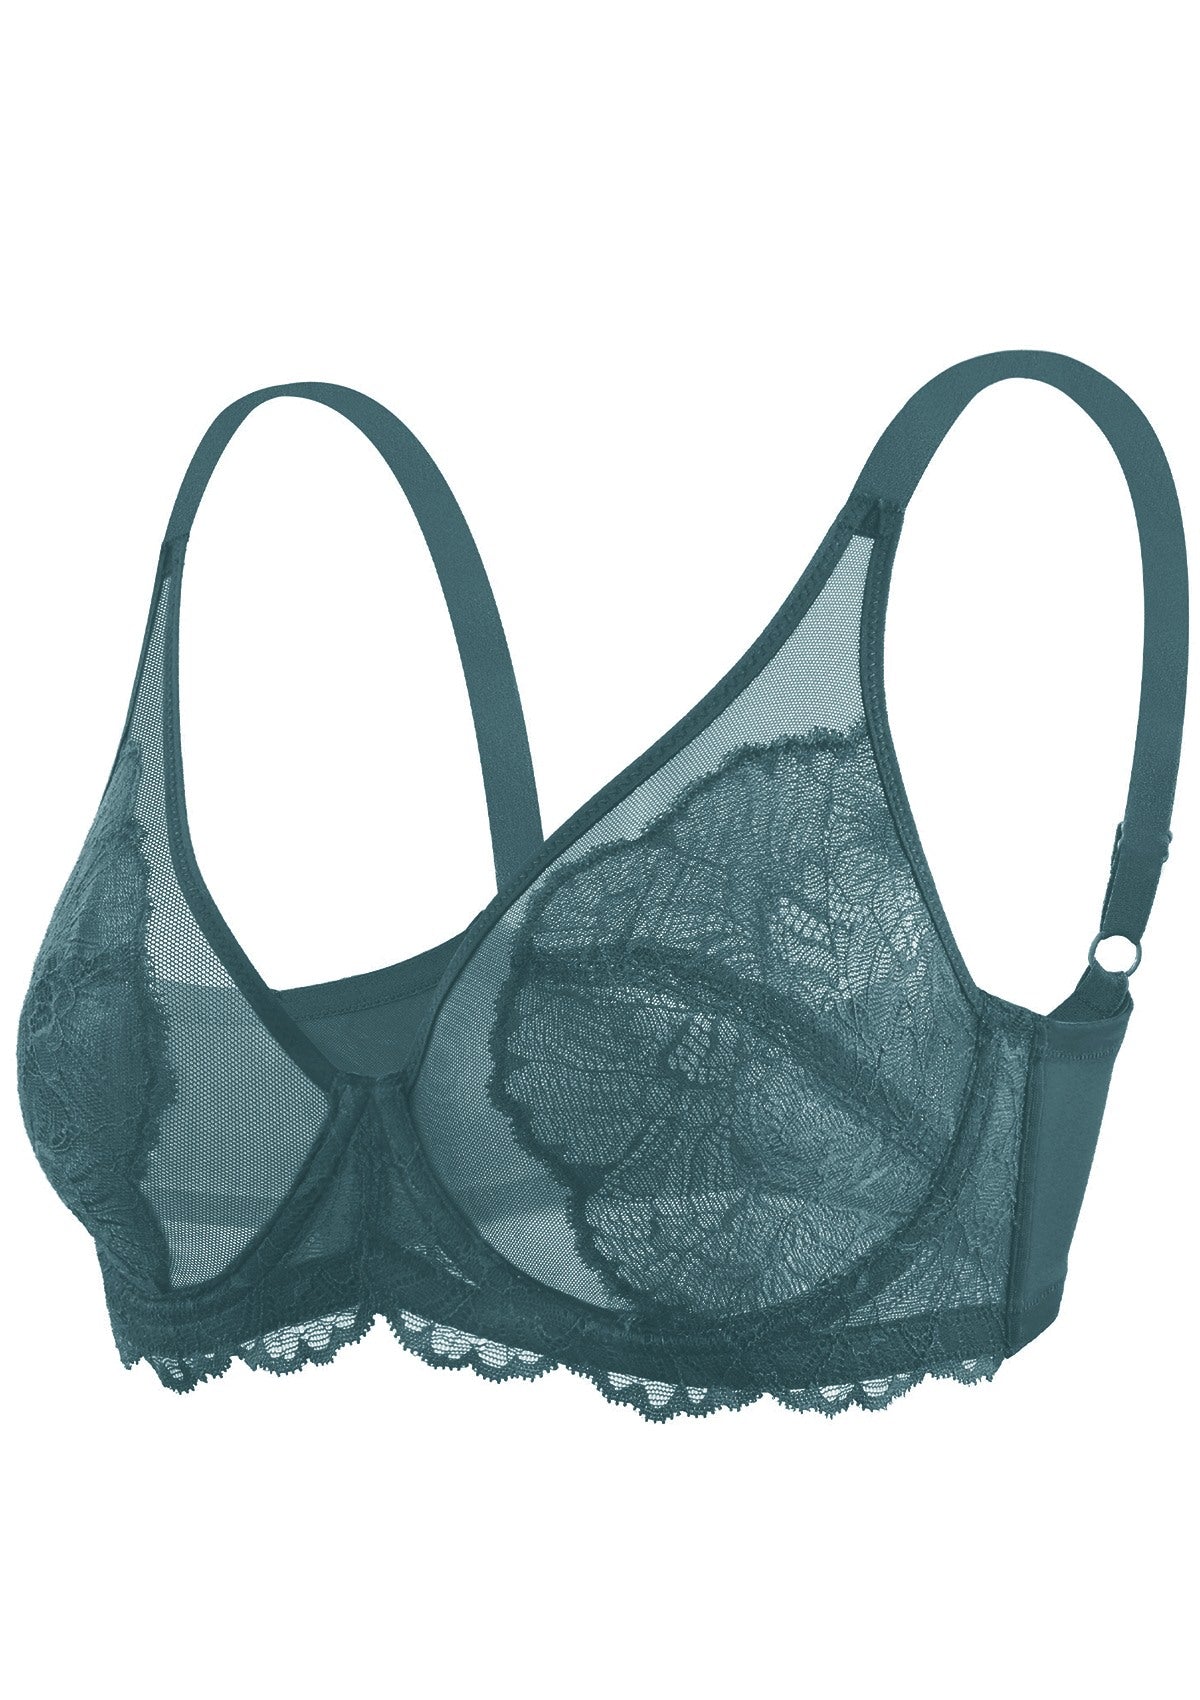 HSIA Blossom Full Figure See-Through Lace Bra For Side And Back Fat - Dark Blue / 40 / C